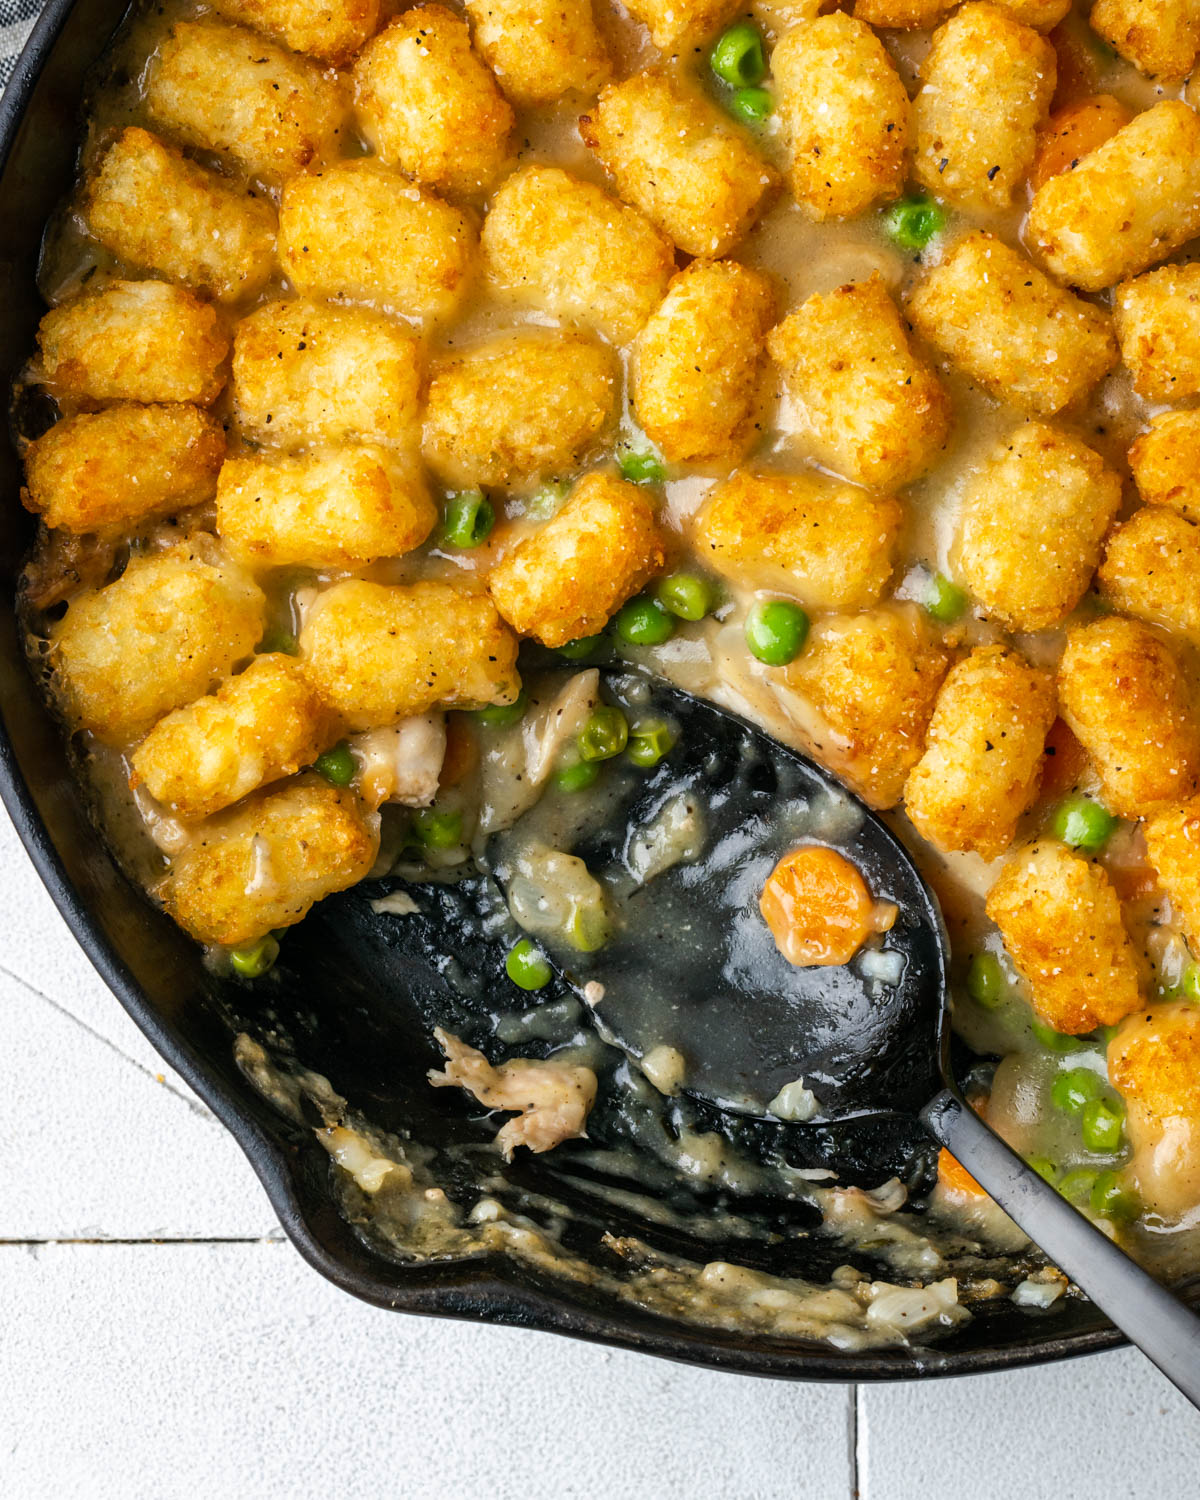 A chicken pot pie casserole with tater tots in a cast iron skillet.